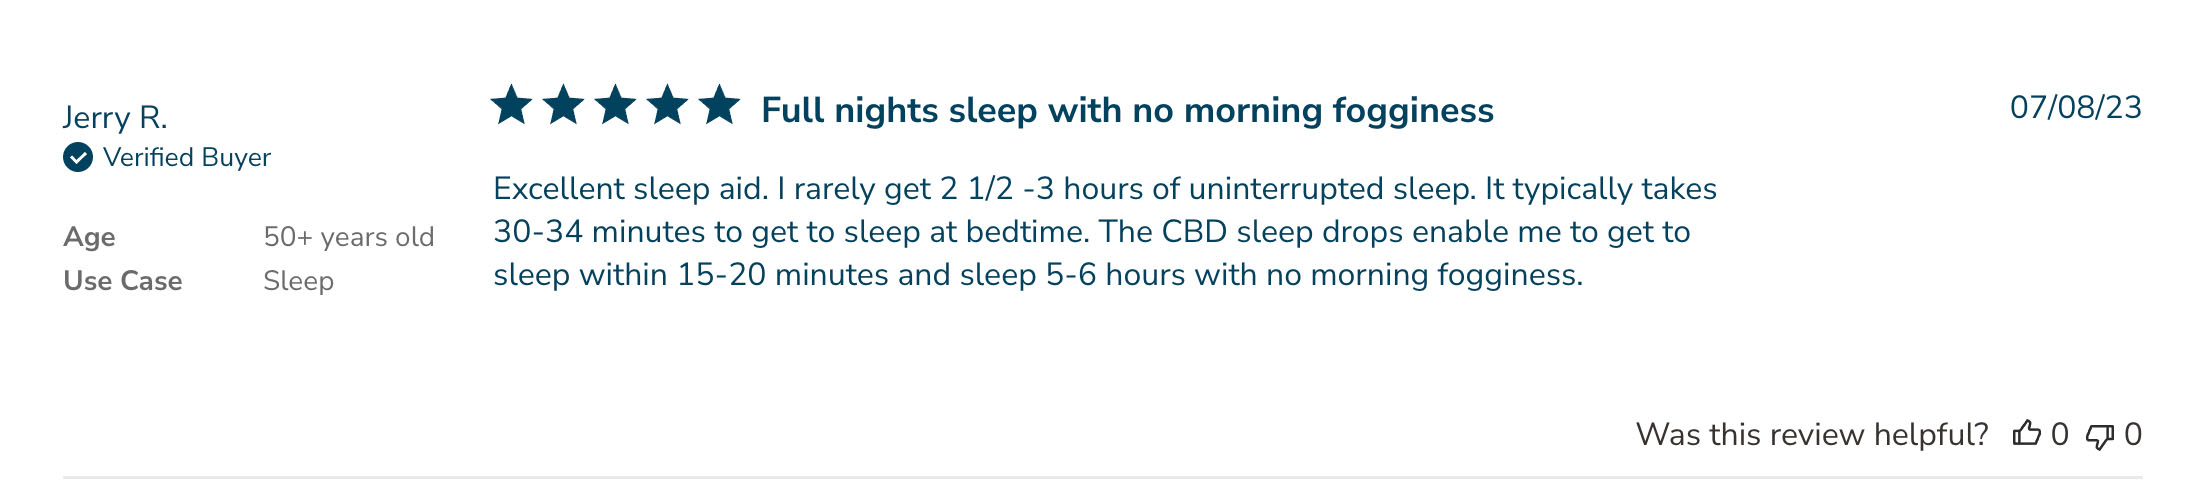 5 stars review by Jerry R.: Full nights sleep with no morning fogginess. Excellent sleep aid. I rarely get 2 1/2 -3 hours of uninterrupted sleep. It typically takes 30-34 minutes to get to sleep at bedtime. The CBD sleep drops enable me to get to sleep within 15-20 minutes and sleep 5-6 hours with no morning fogginess.